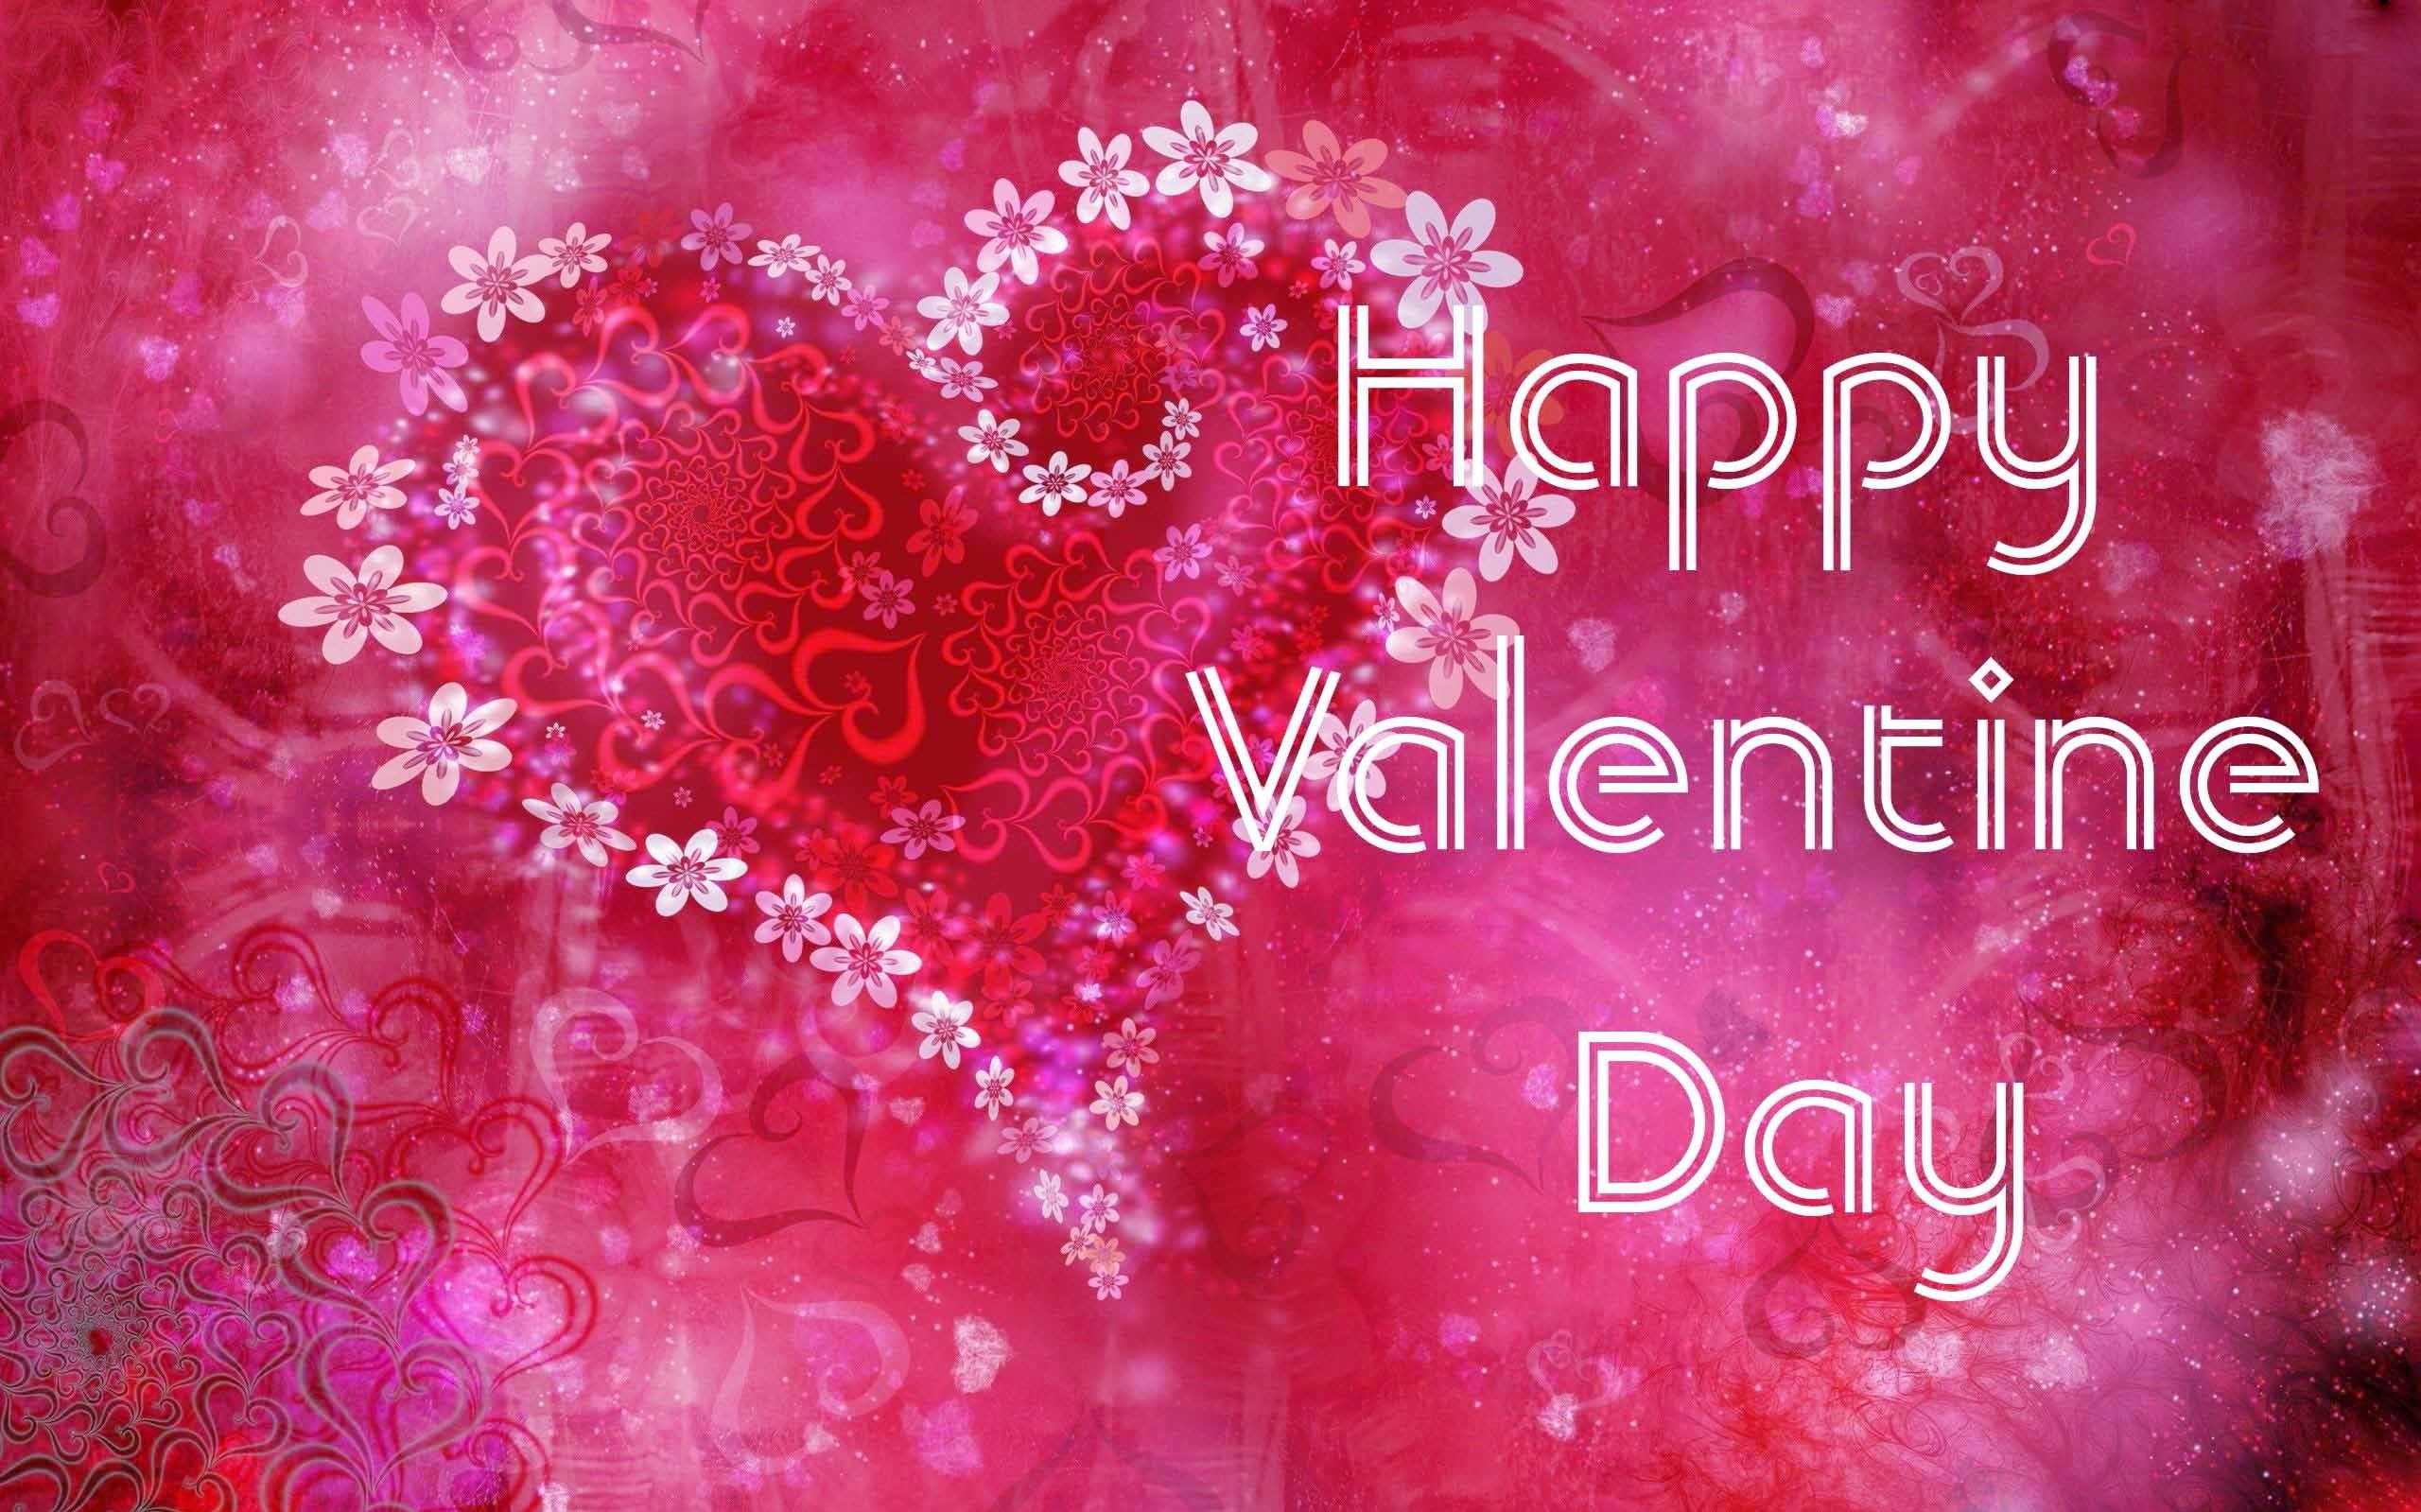 Free Valentines day screensavers and wallpapers - Vanity Owl